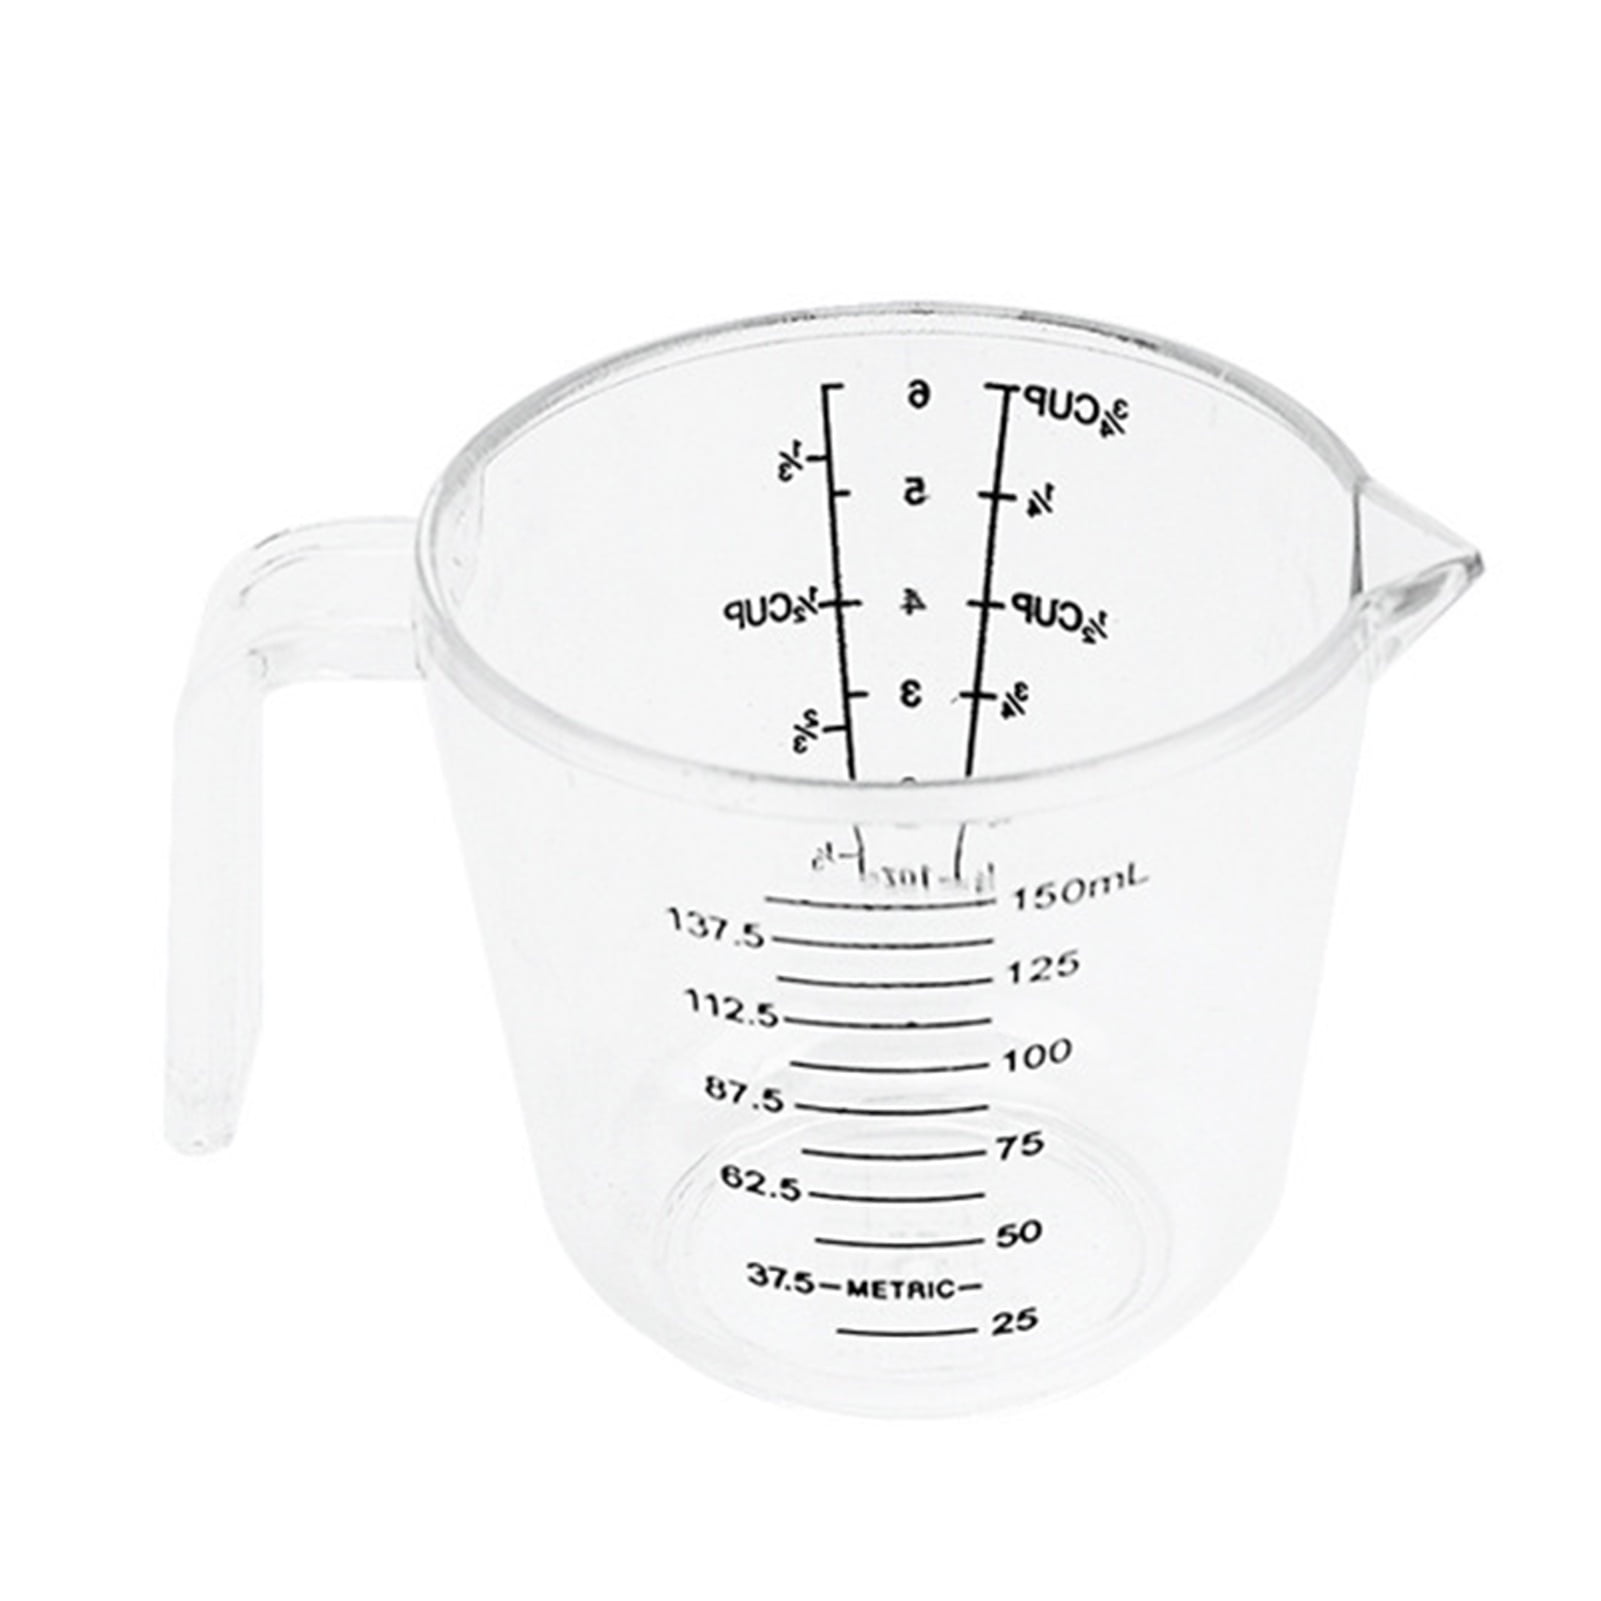 Measuring Cups Set, Liquid Measuring Cups For 3 For Kitchen - BPA Free  Plastic Set with Spout Multiple Measurement Scales (Clear)